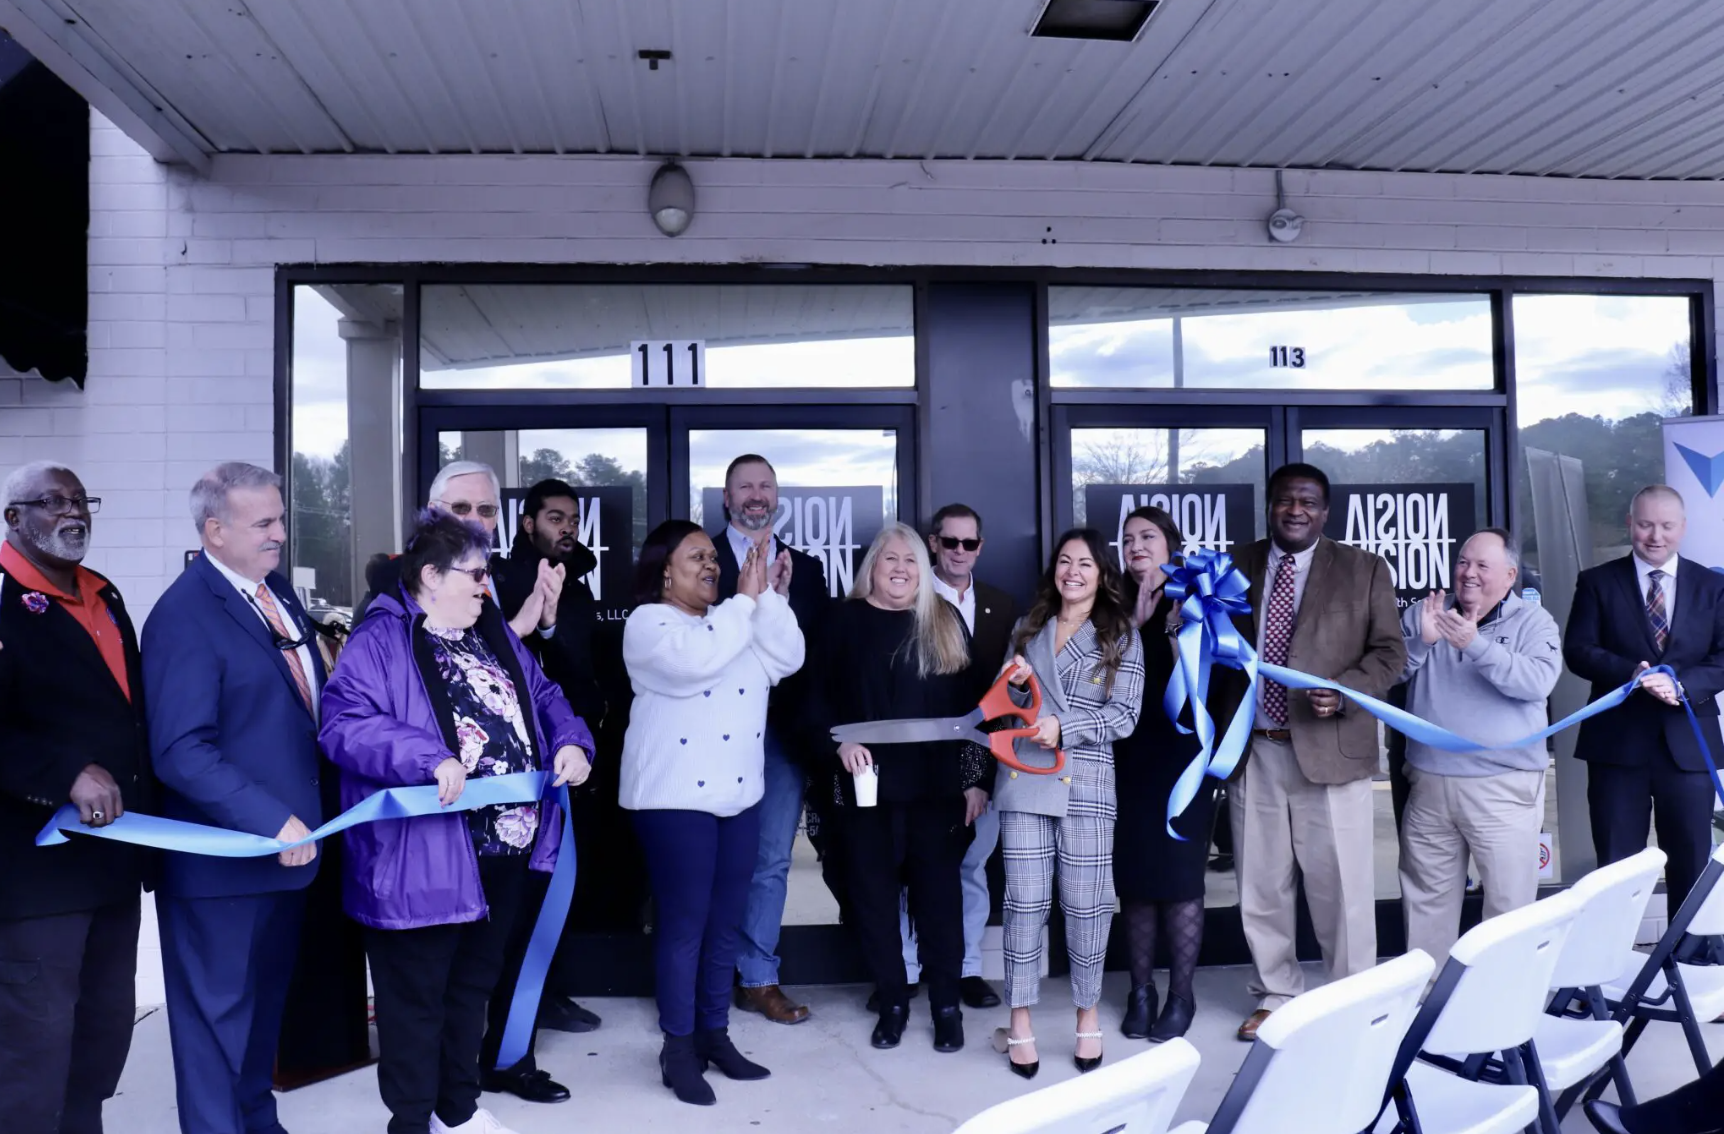 Walk-in center ribbon cutting ceremony